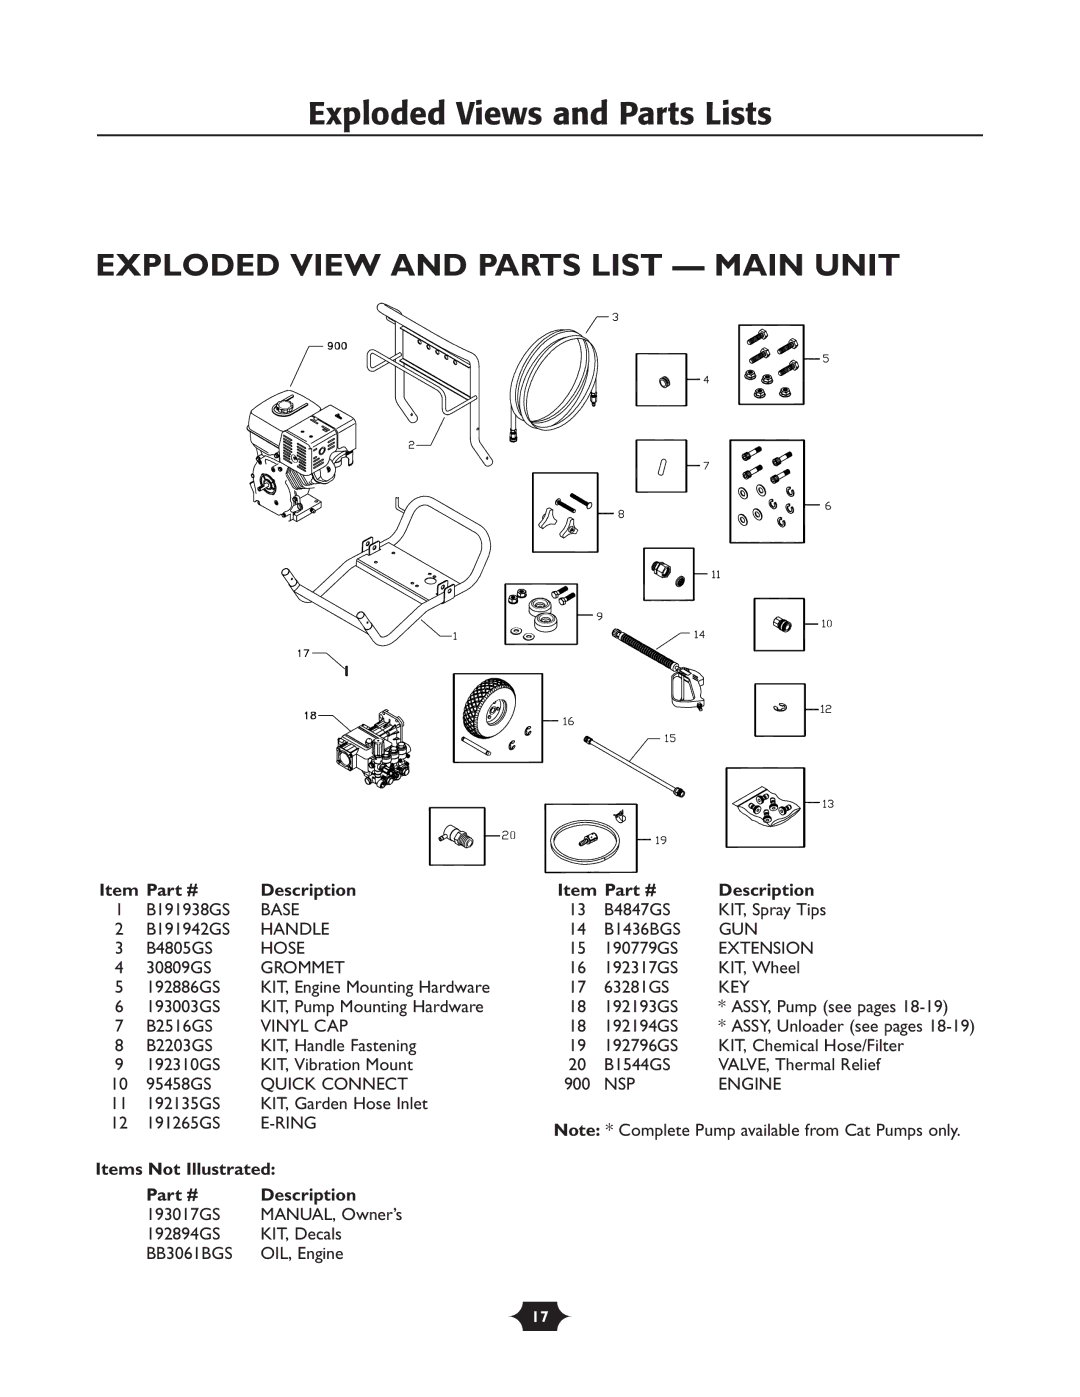 Husqvarna 1337PW owner manual Exploded View and Parts List Main Unit, Items Not Illustrated Description 